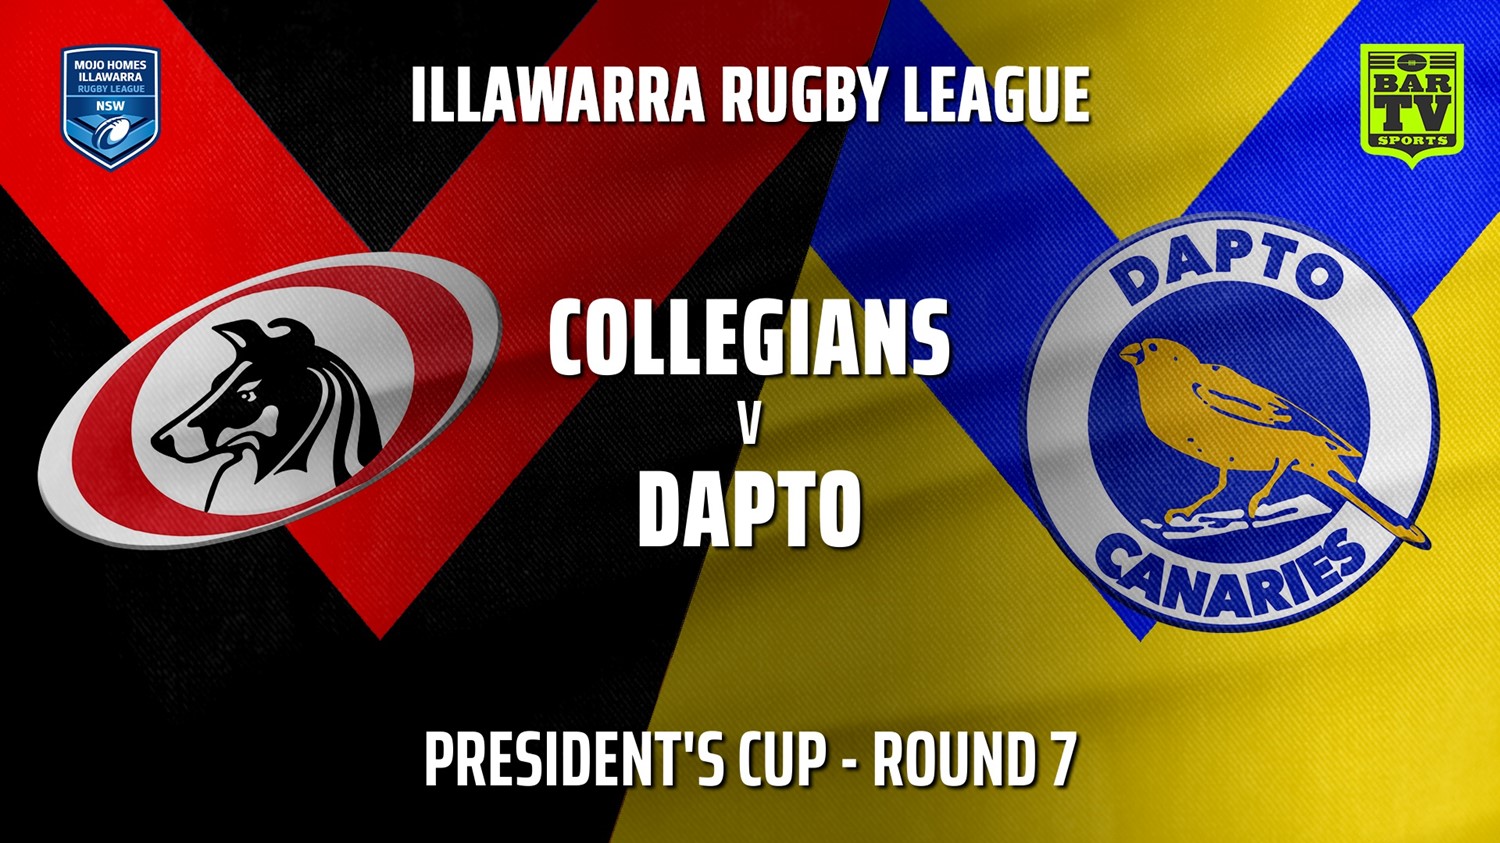 210529-IRL Round 7 - President's Cup - Collegians v Dapto Canaries Slate Image